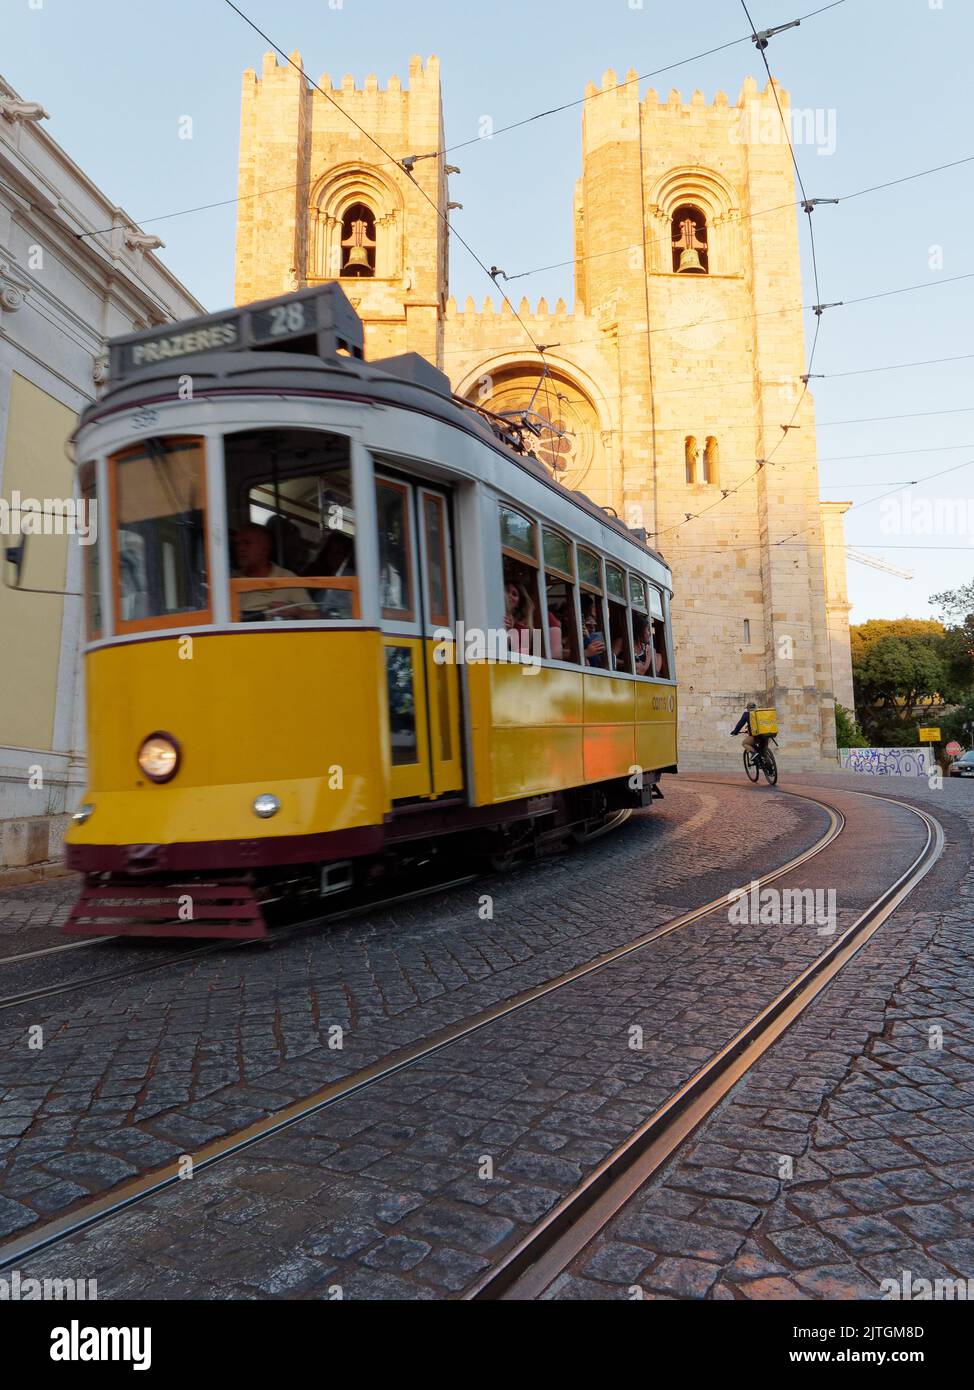 The Cathedral of Saint Mary Major aka Lisbon Cathedral (Sé de Lisboa) as a yellow Tram and delivery cyclist passes on a summers evening. Stock Photo